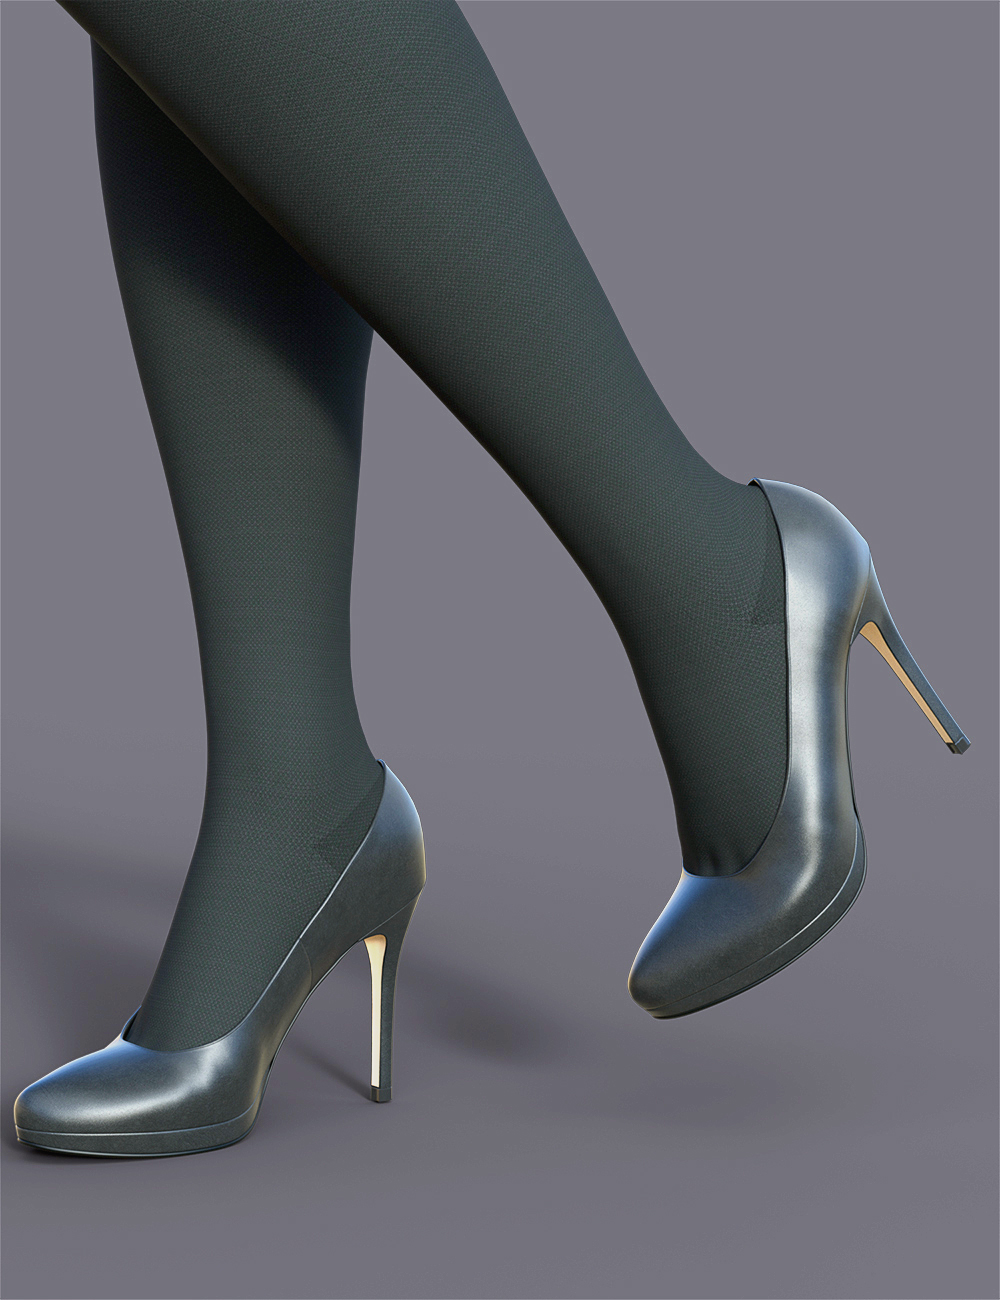 H&C Overcoat Outfit for Genesis 8 Female(s) by: IH Kang, 3D Models by Daz 3D